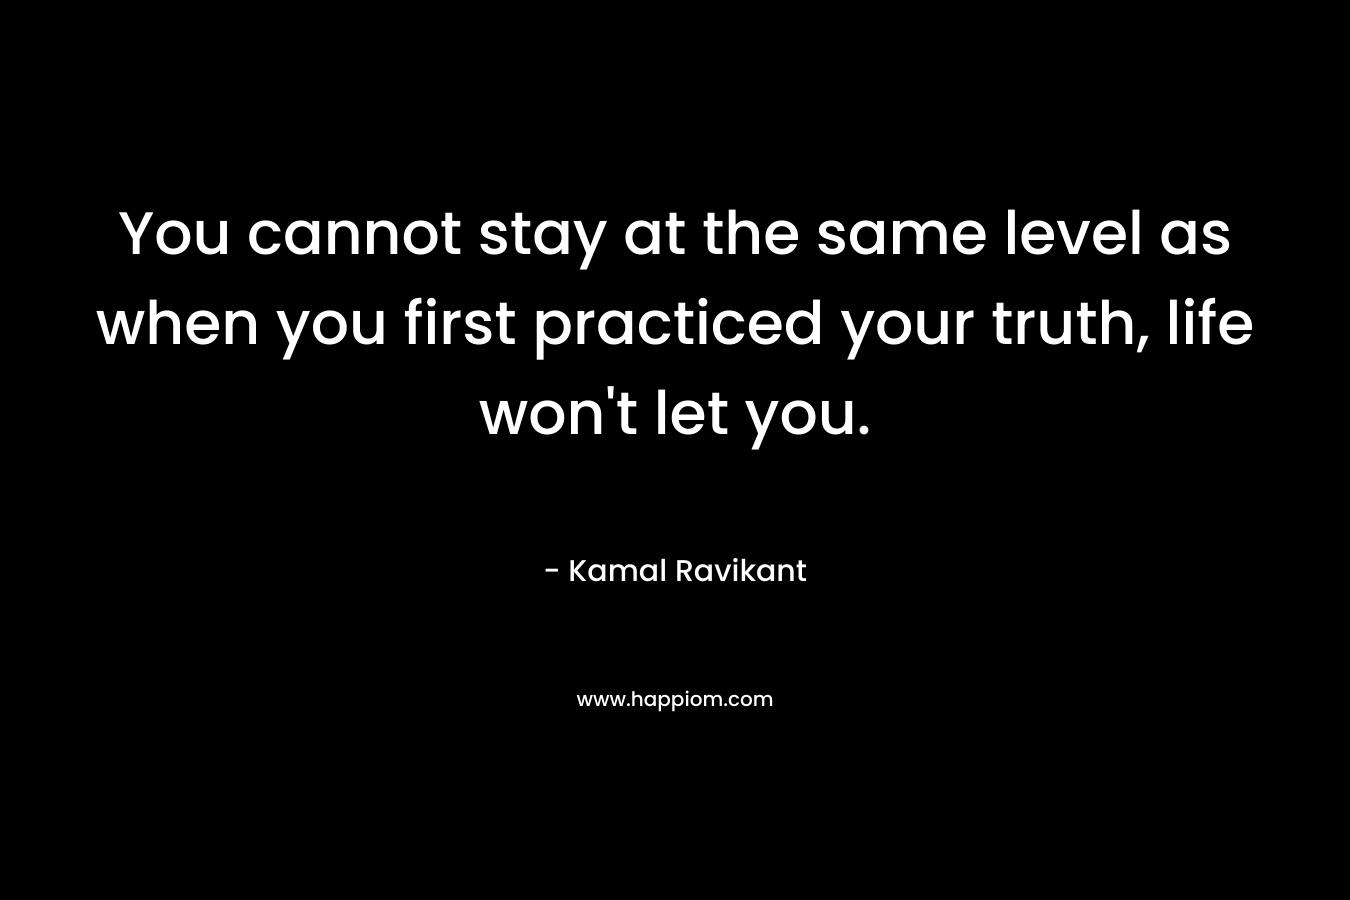 You cannot stay at the same level as when you first practiced your truth, life won't let you.